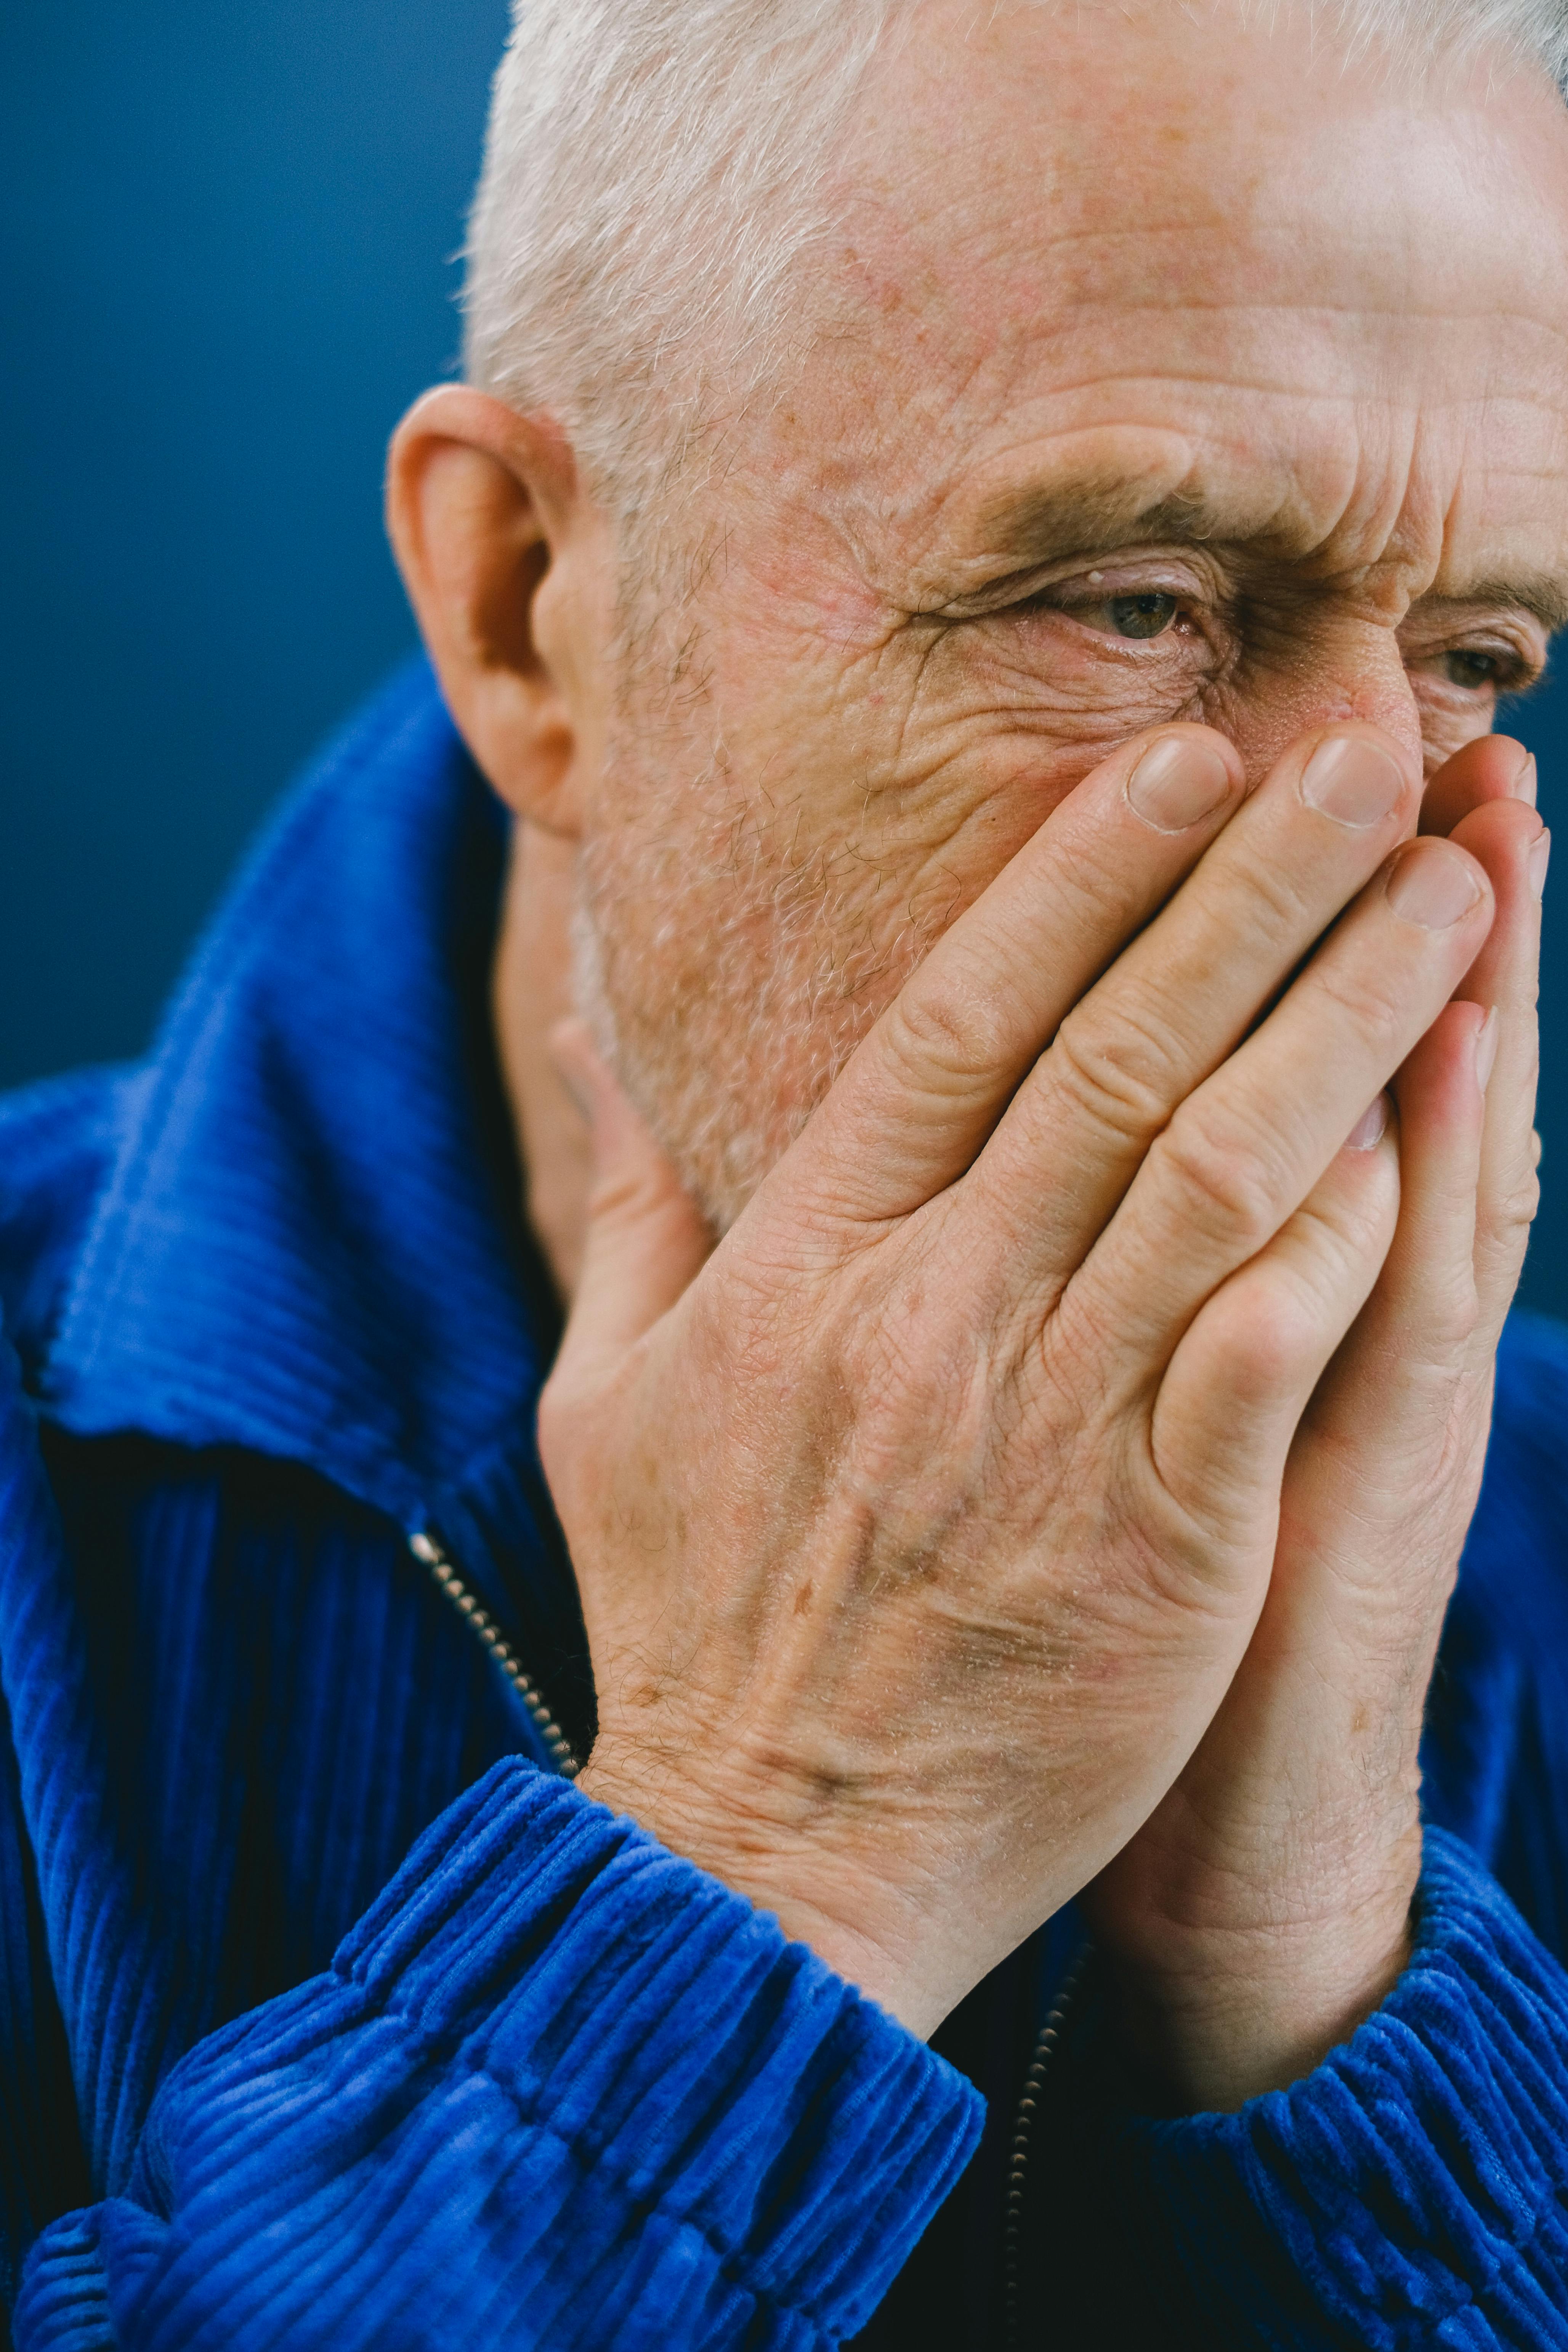 An upset older man covering his mouth and nose with his hands | Source: Pexels